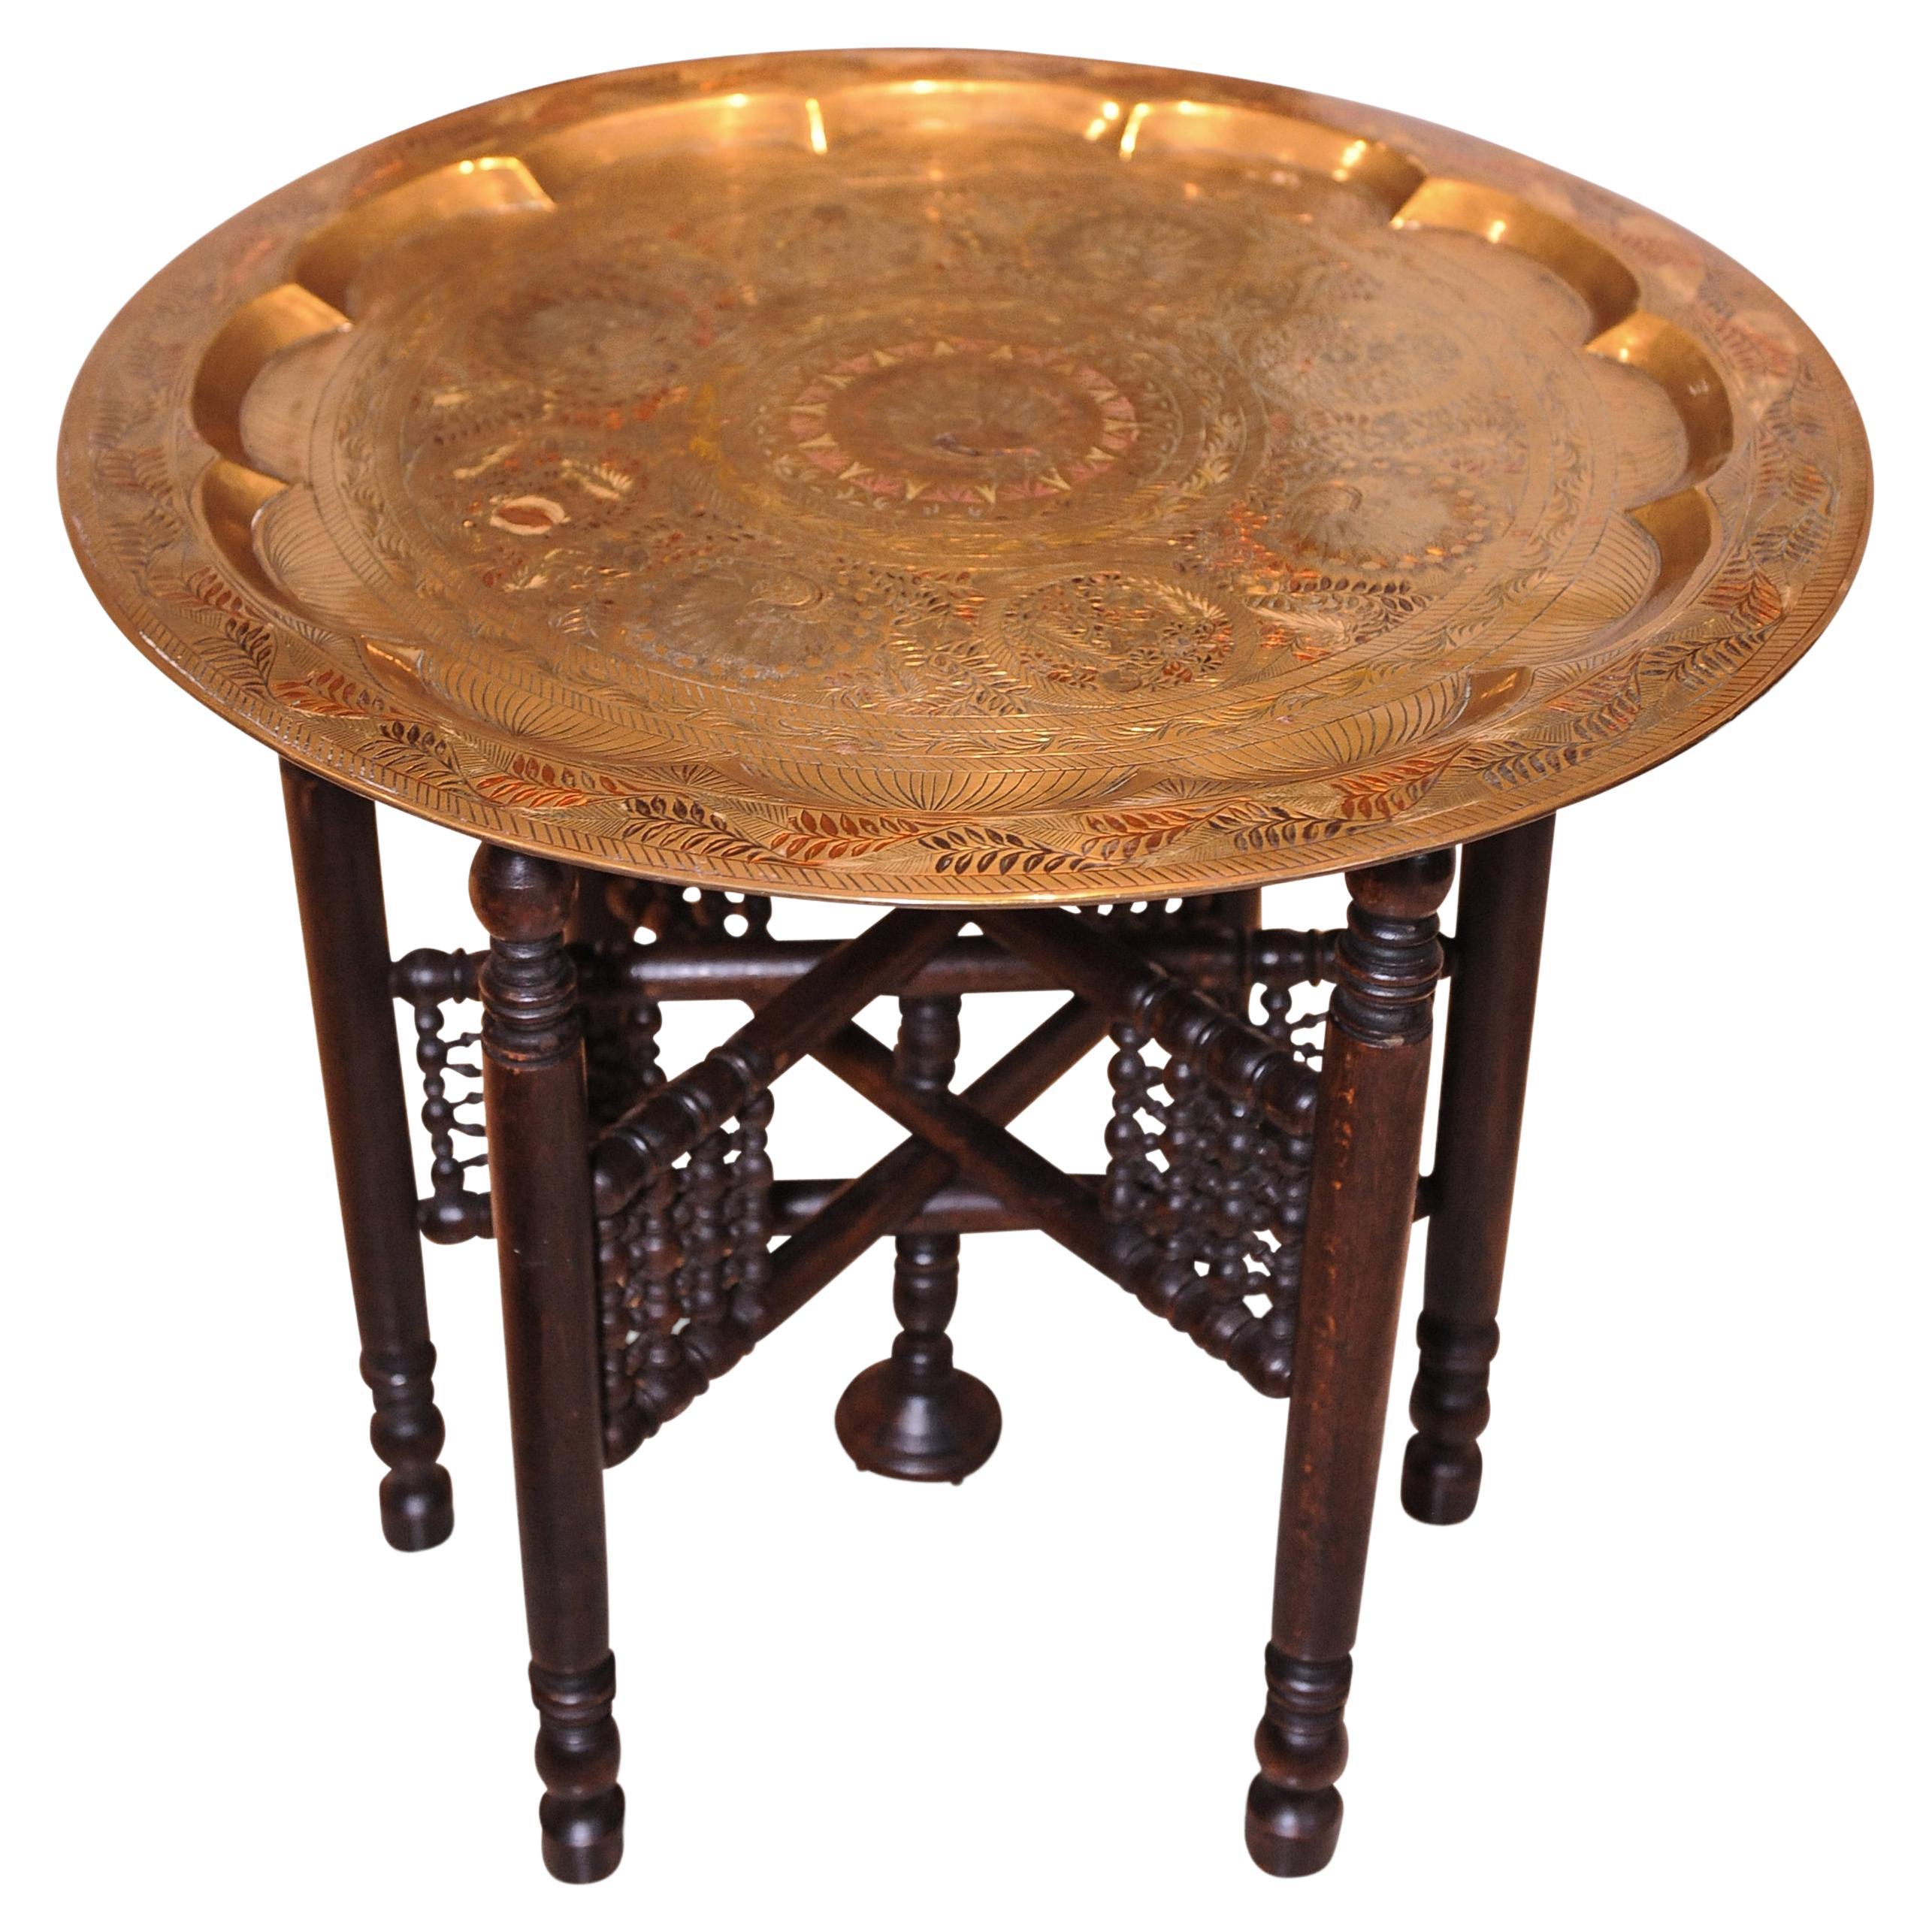 Middle Eastern Brass and Hardwood Table Decorated with Peacocks Early 1900's